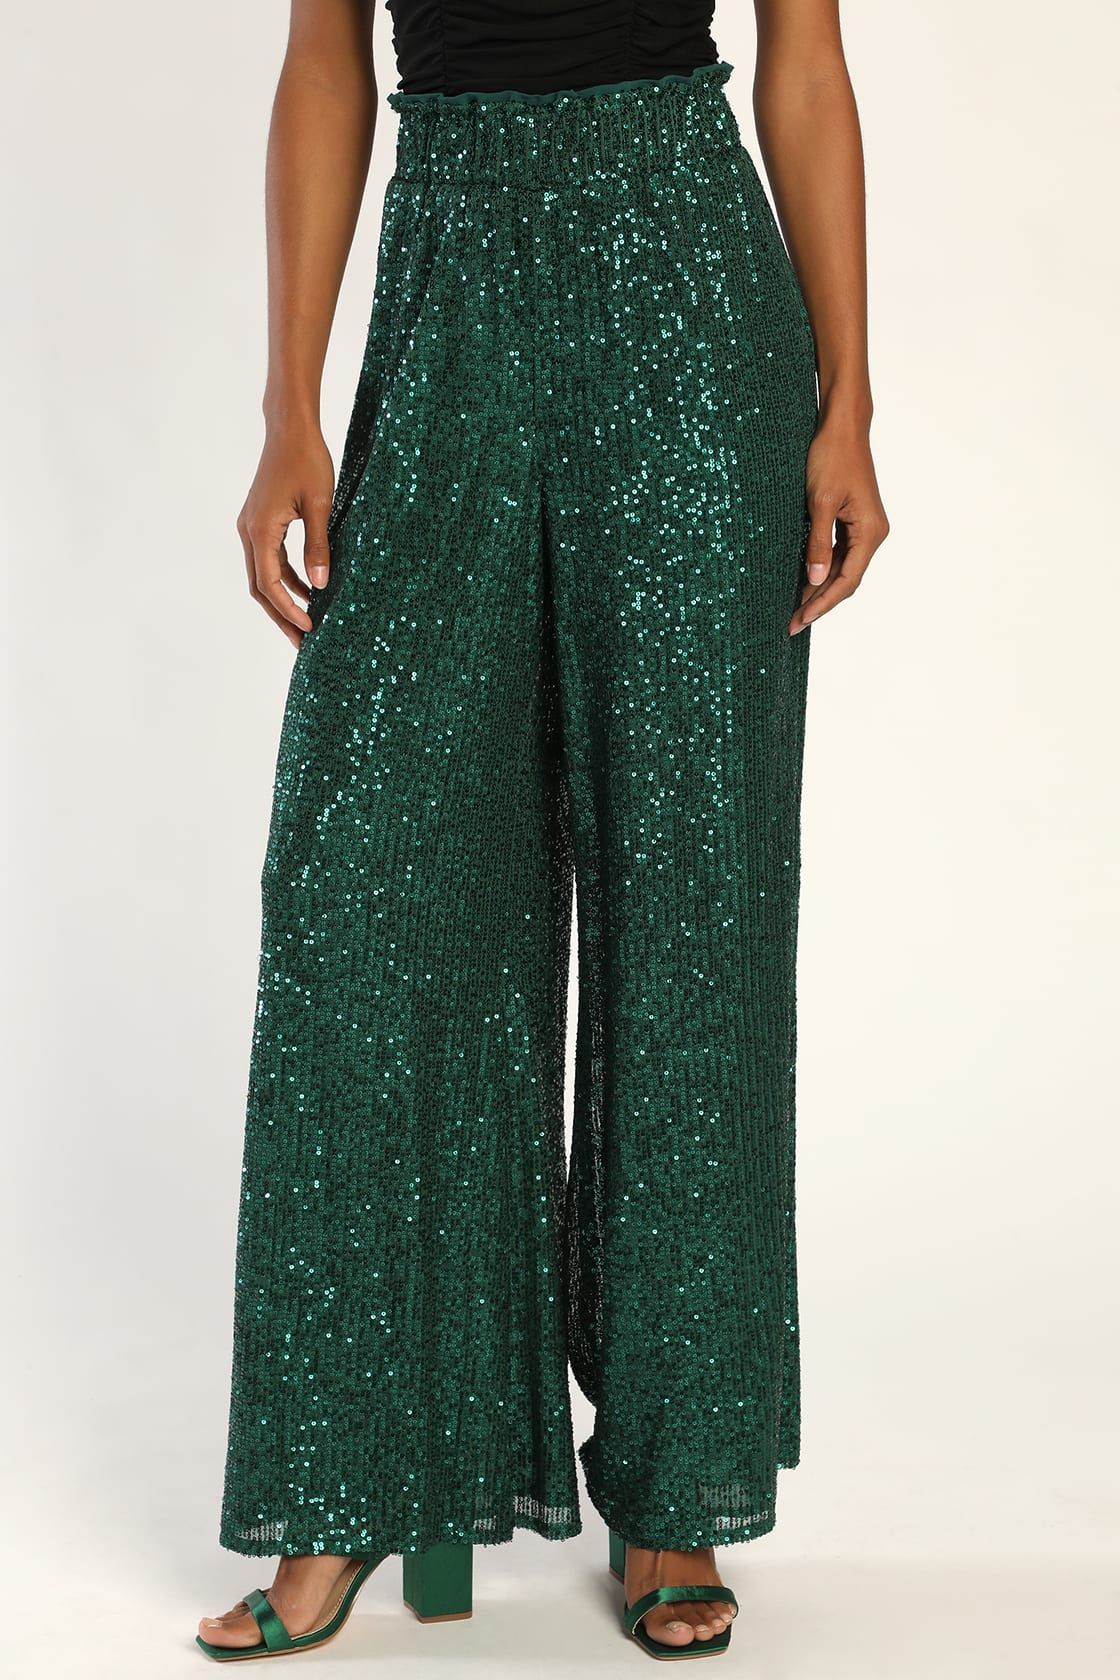 Flawless Sparkle Teal Green Sequin Wide-Leg Pants | Lulus (US)